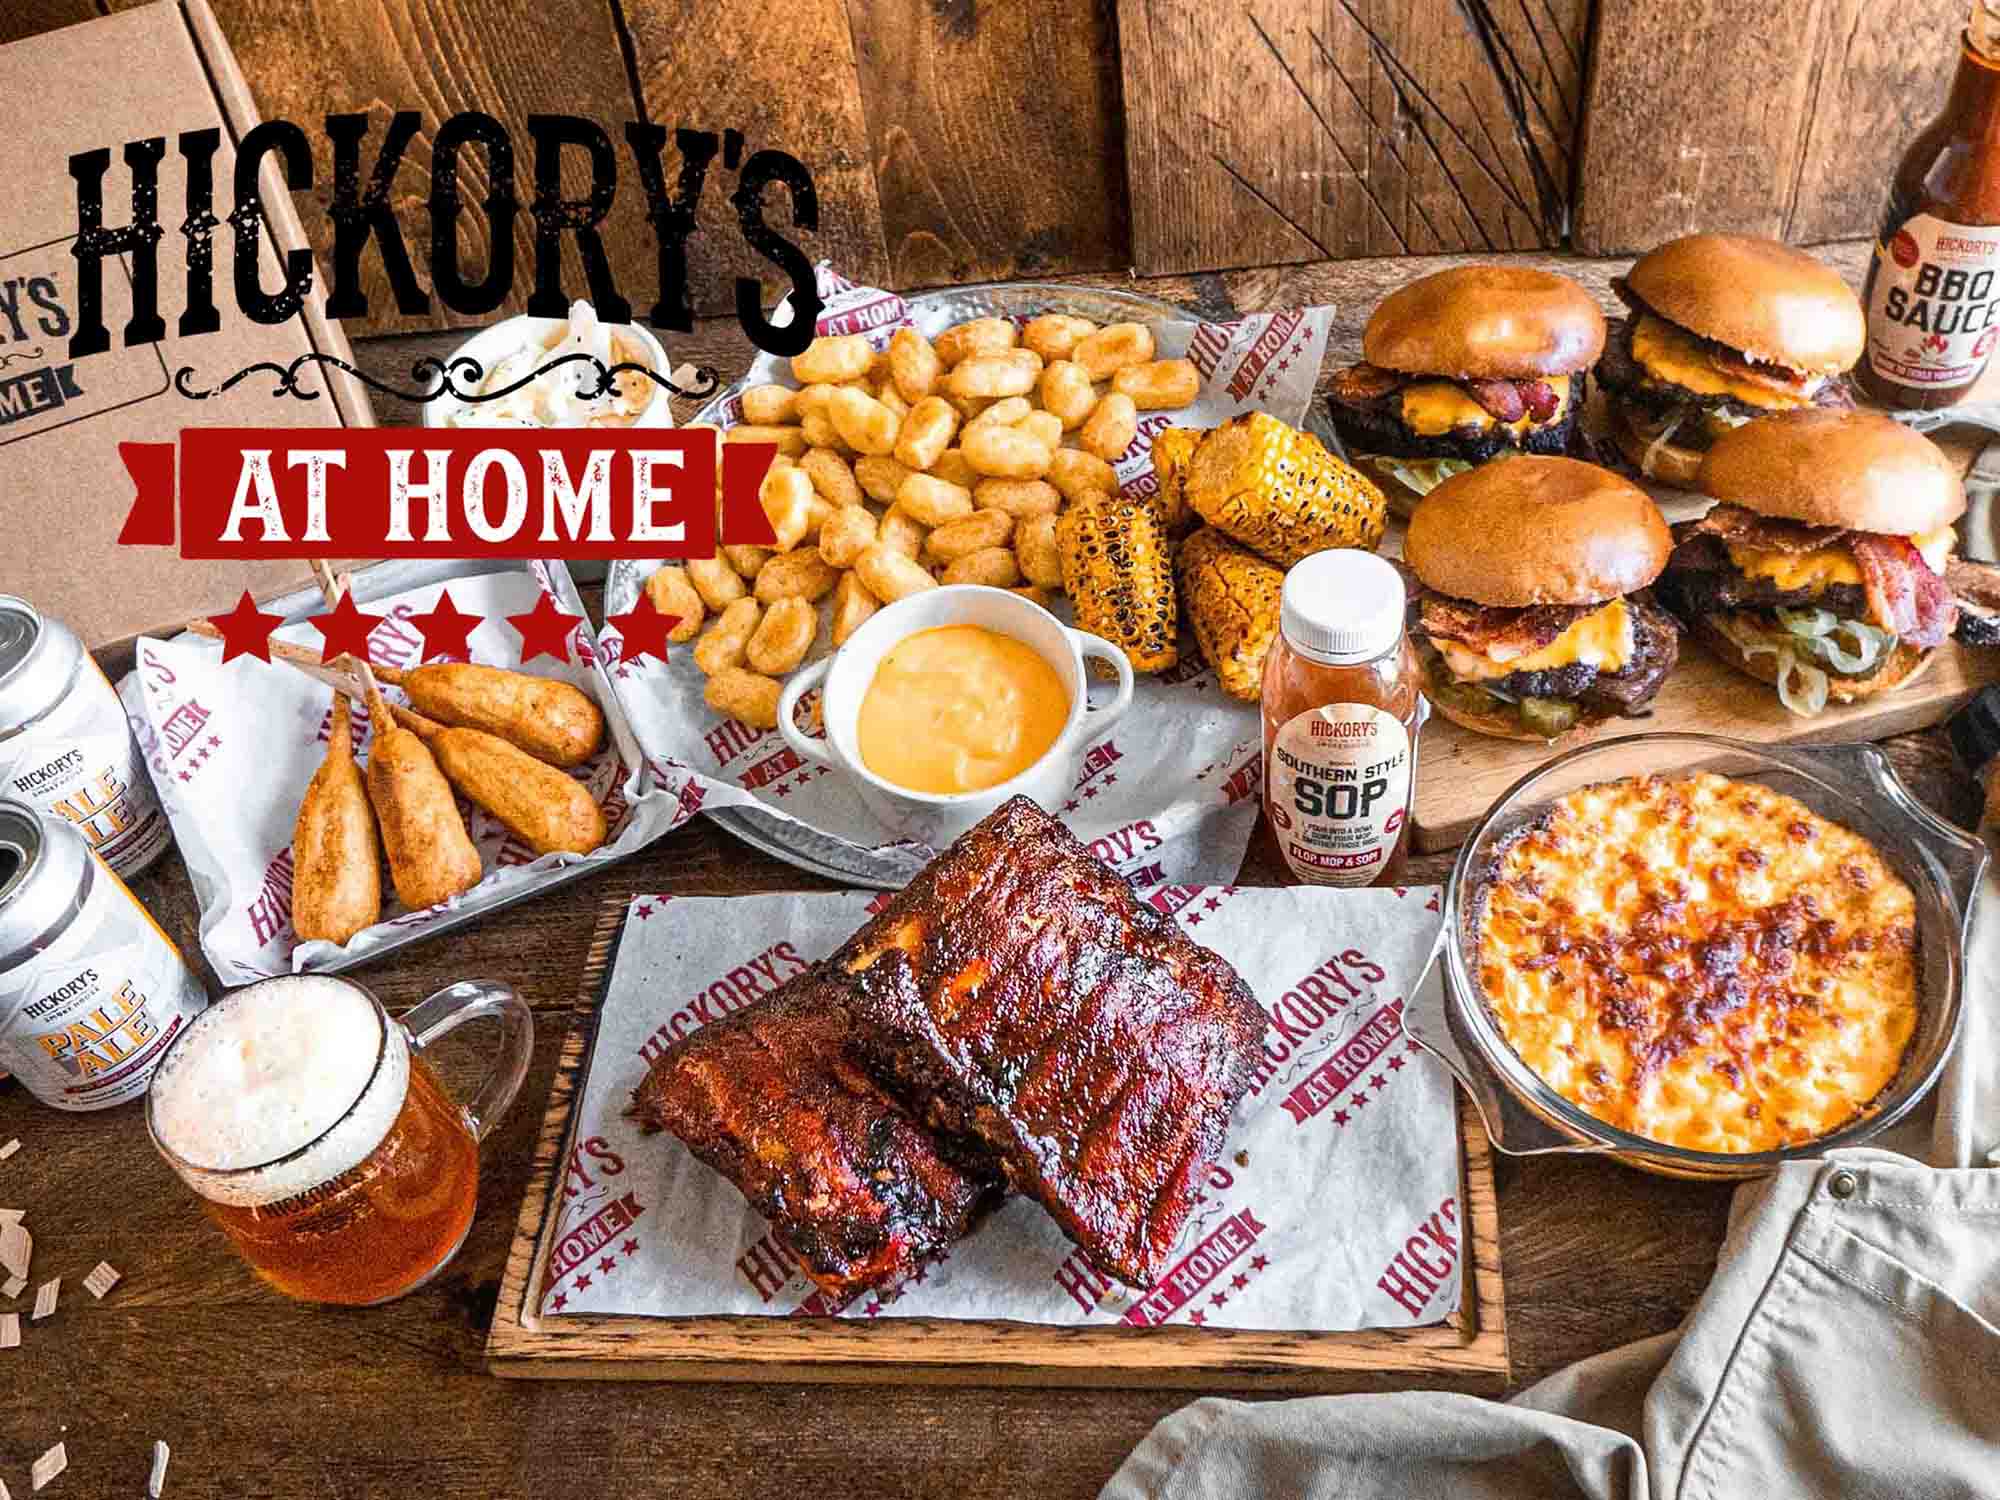 How to Make the Most Out of Fathers Day - Hickorys At Home